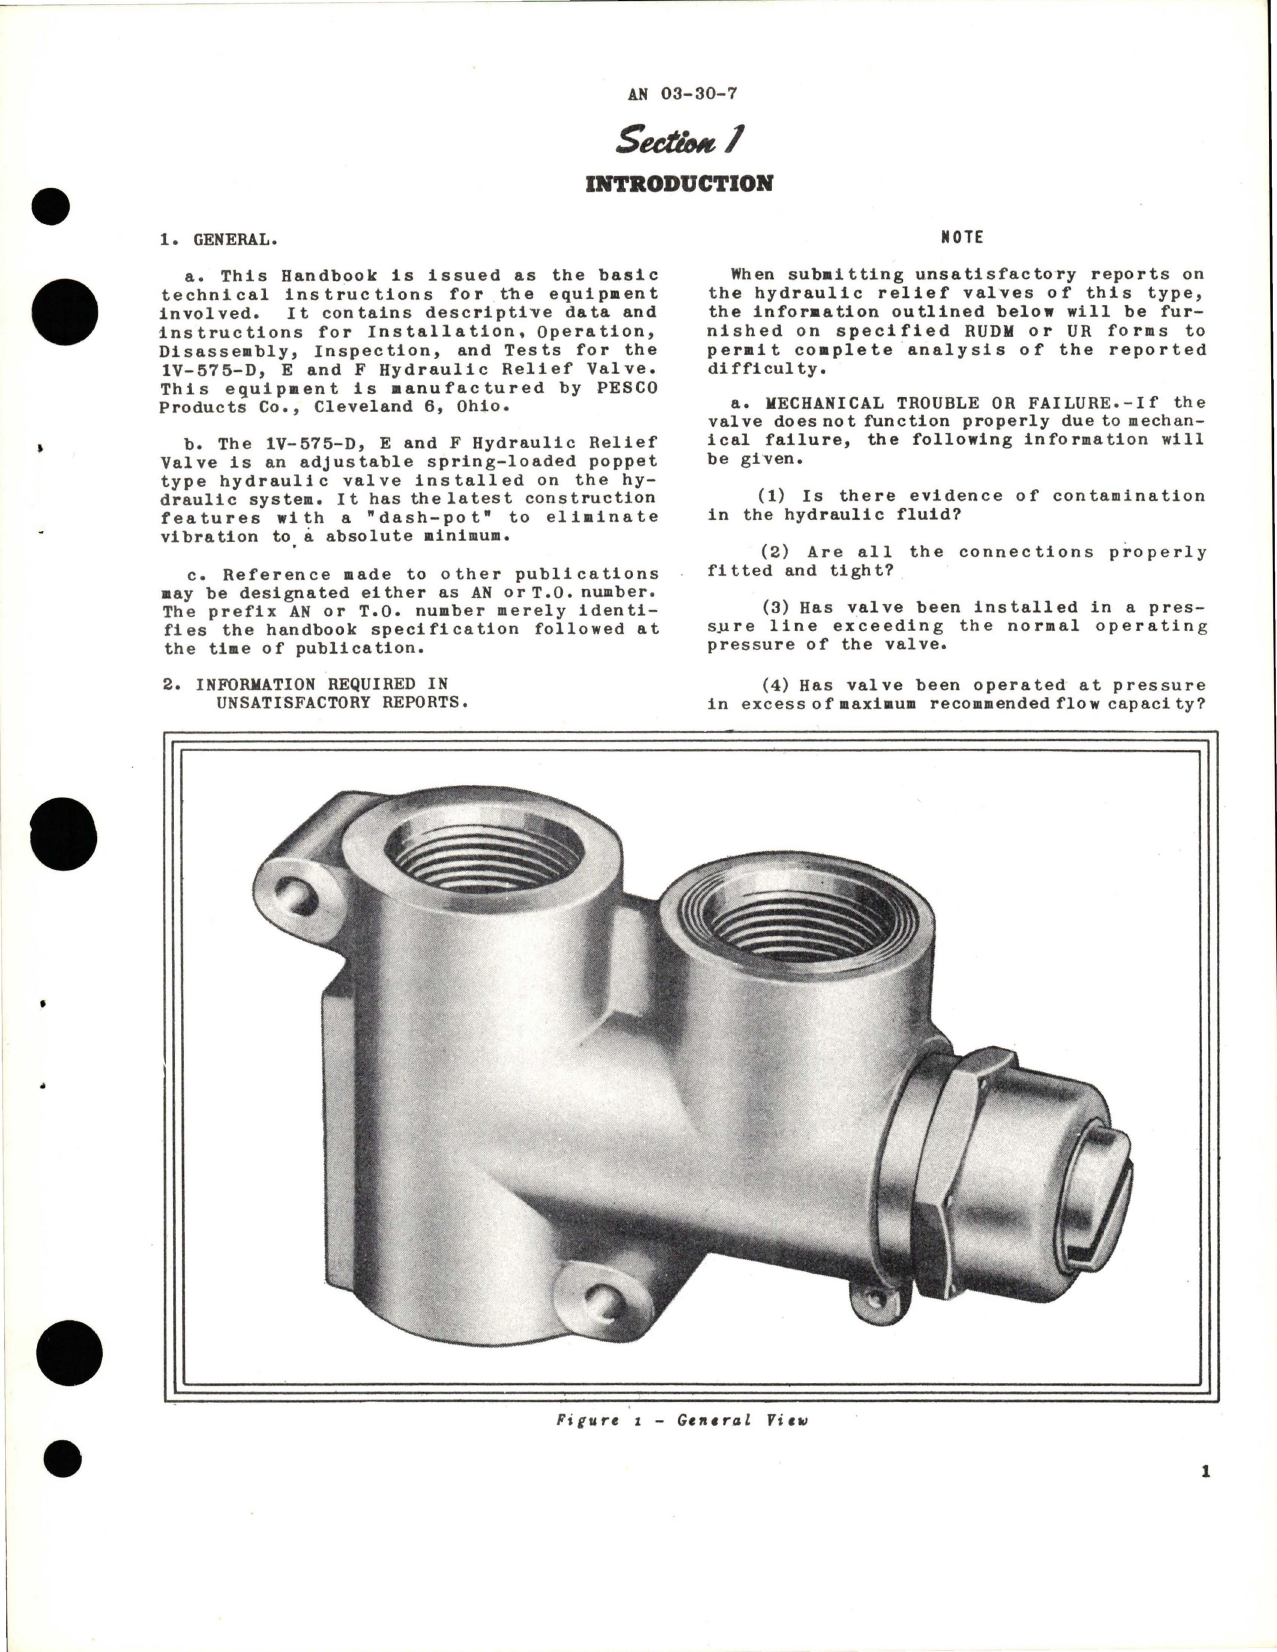 Sample page 5 from AirCorps Library document: Operation, Service and Overhaul Instructions with Parts Catalog for Pesco Hydraulic Relief Valve